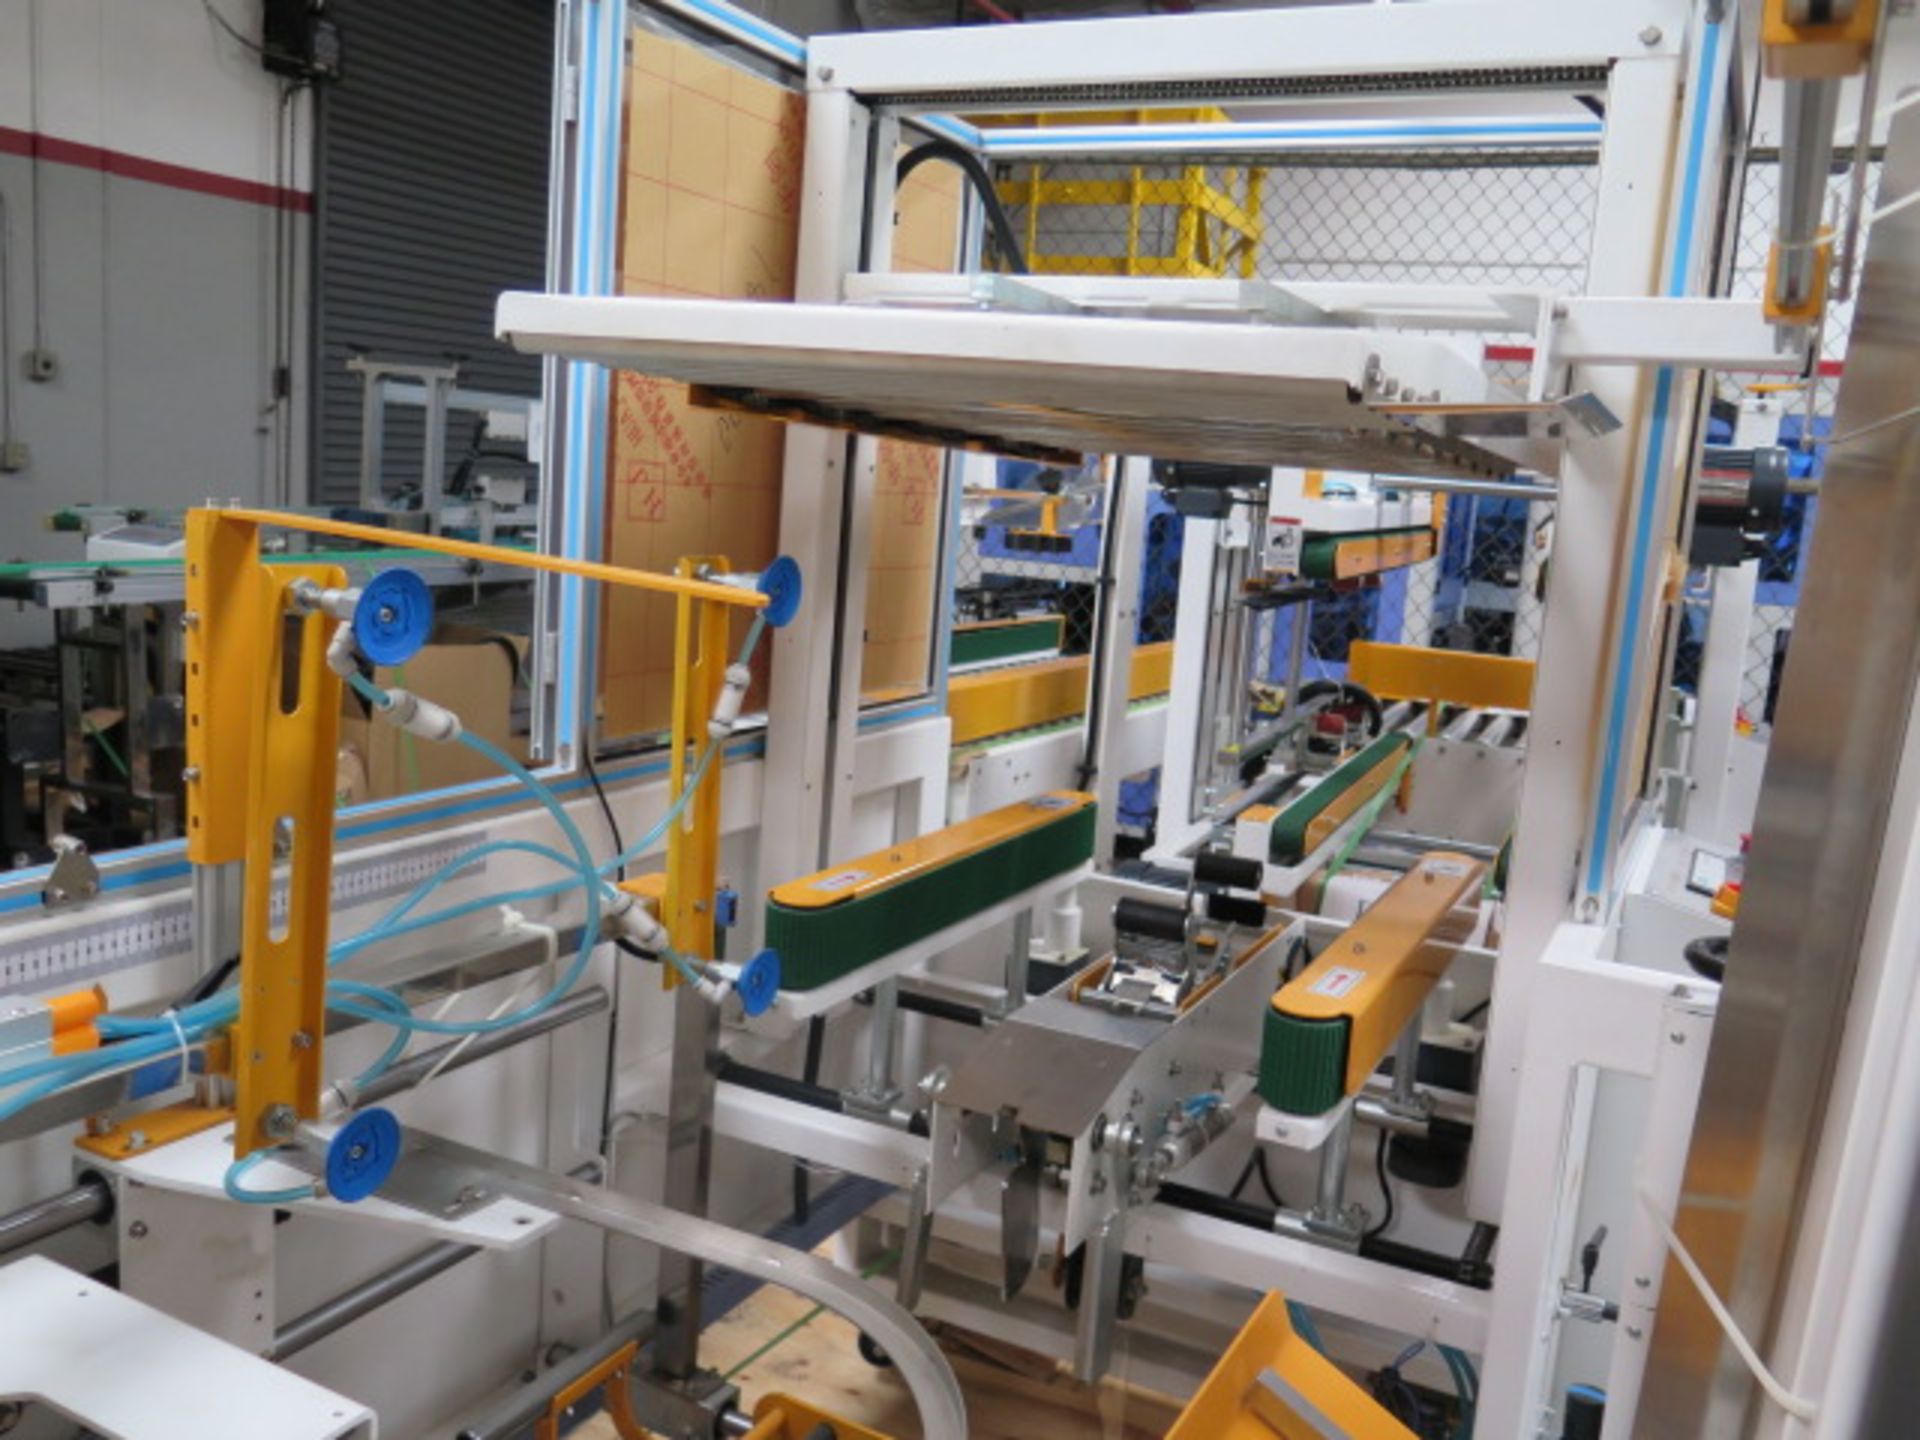 2022(NEW) Rongyu RY-ZH-80 Packaging Machine s/n220302 w/Siemens Smart Line Touch Controls,SOLD AS IS - Image 30 of 48